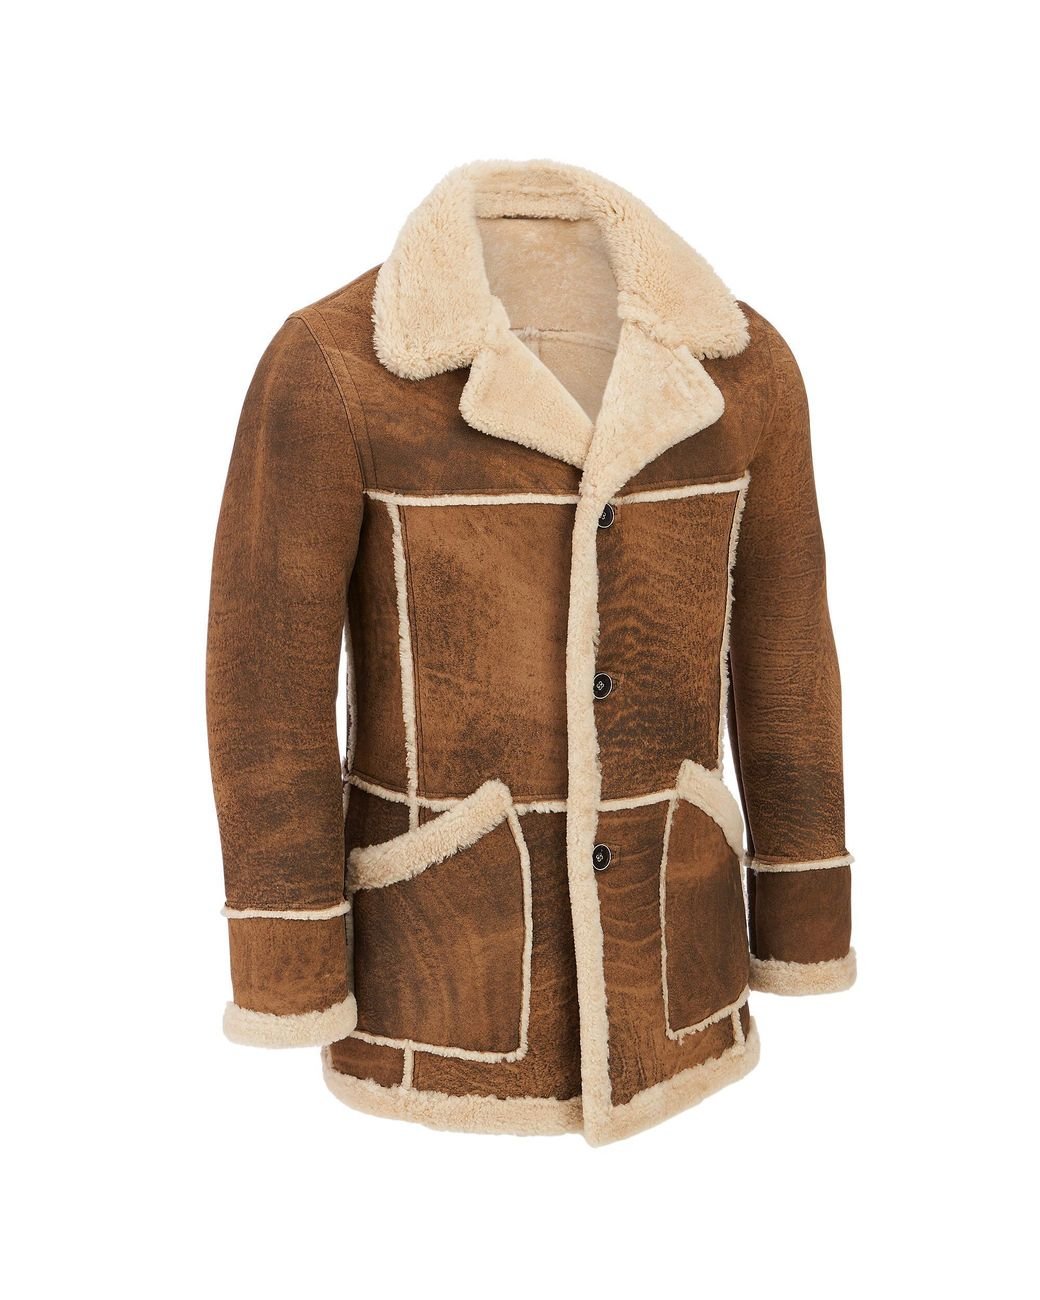 Wilsons Leather Marlboro Shearling Leather Jacket in Brown for Men | Lyst